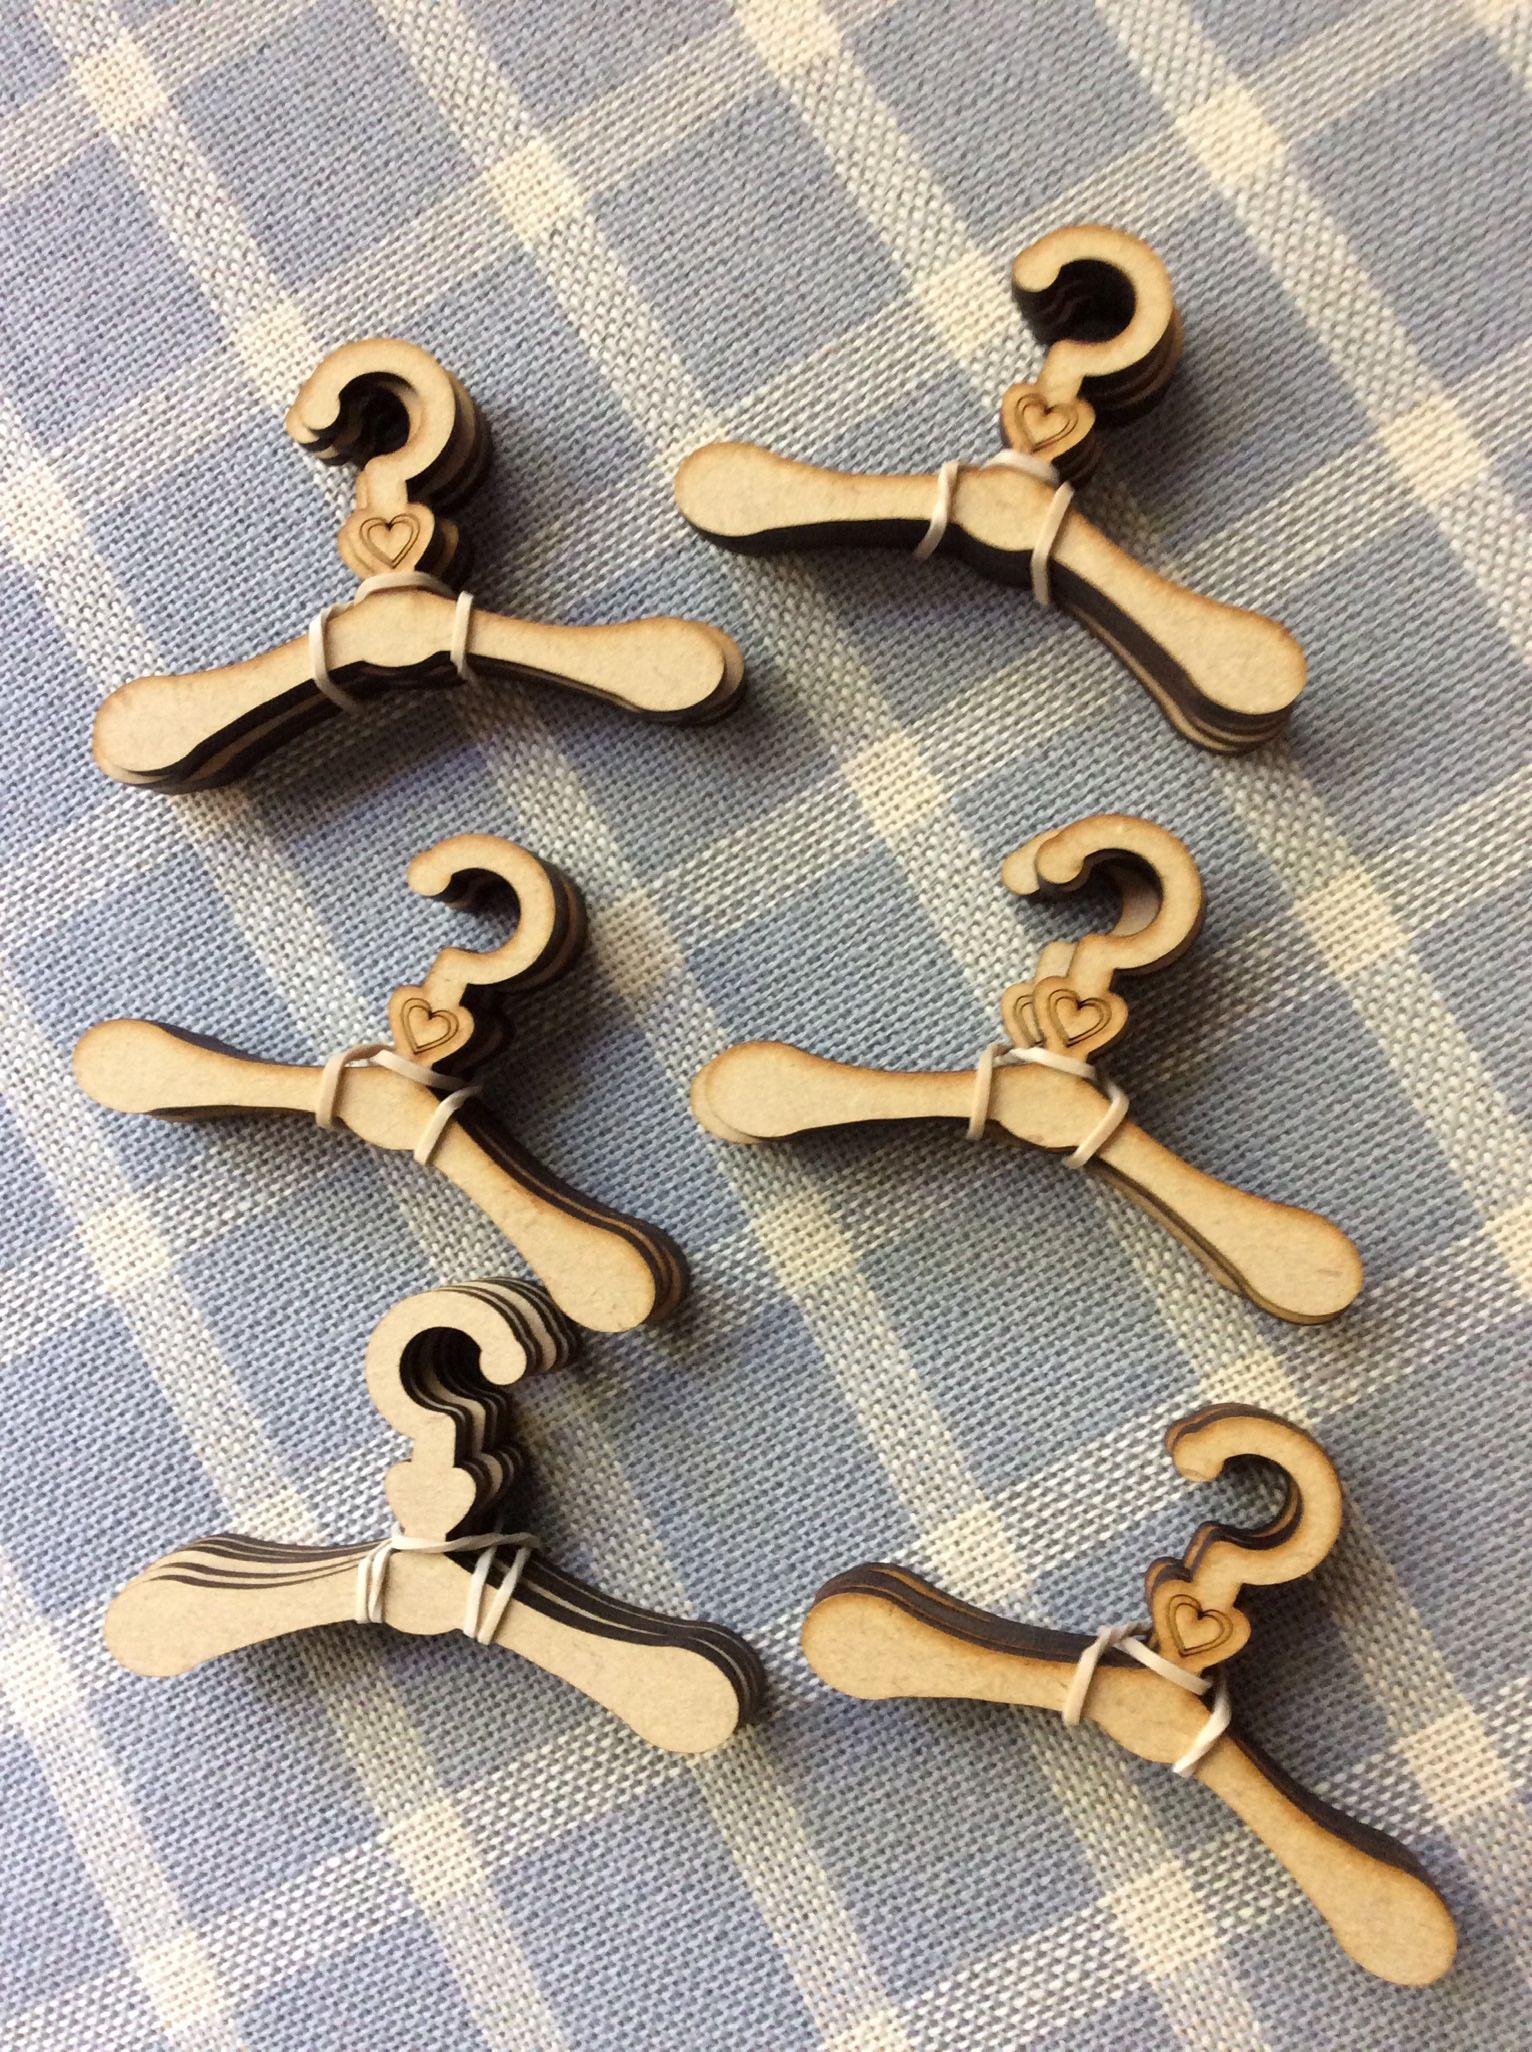 30 Wood Miniature Doll Clothes Hangers